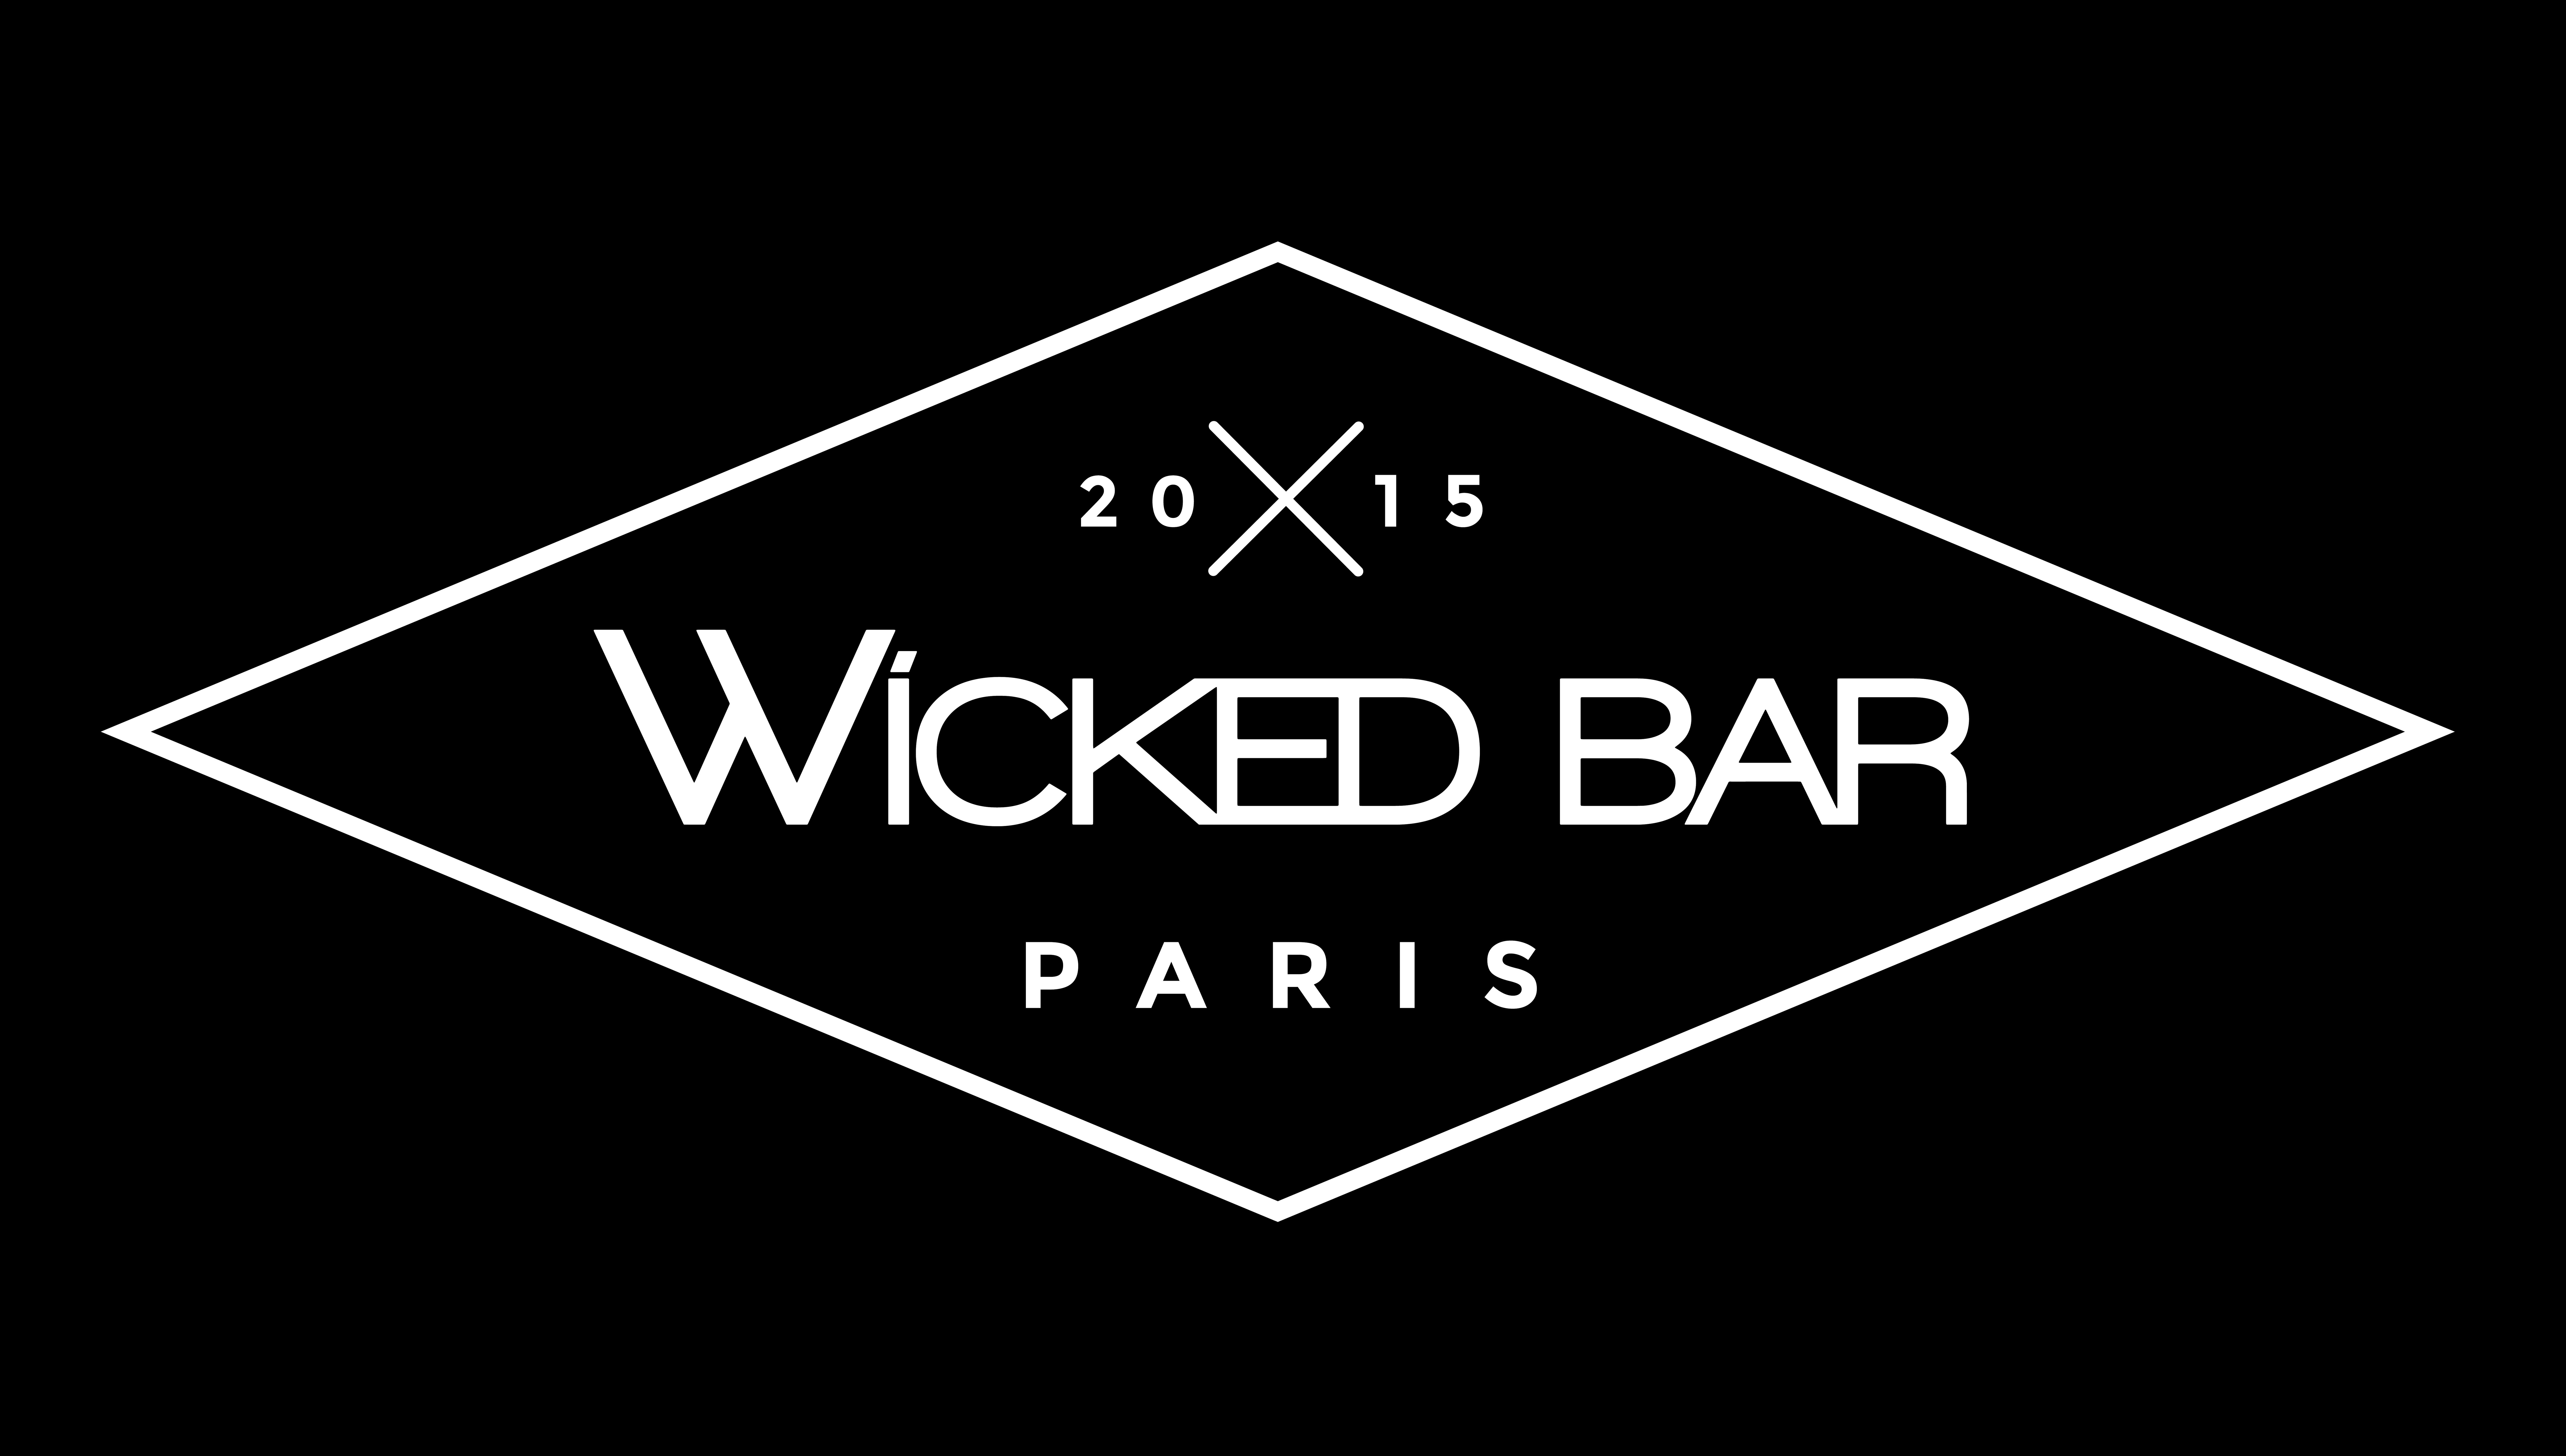 Wicked bar